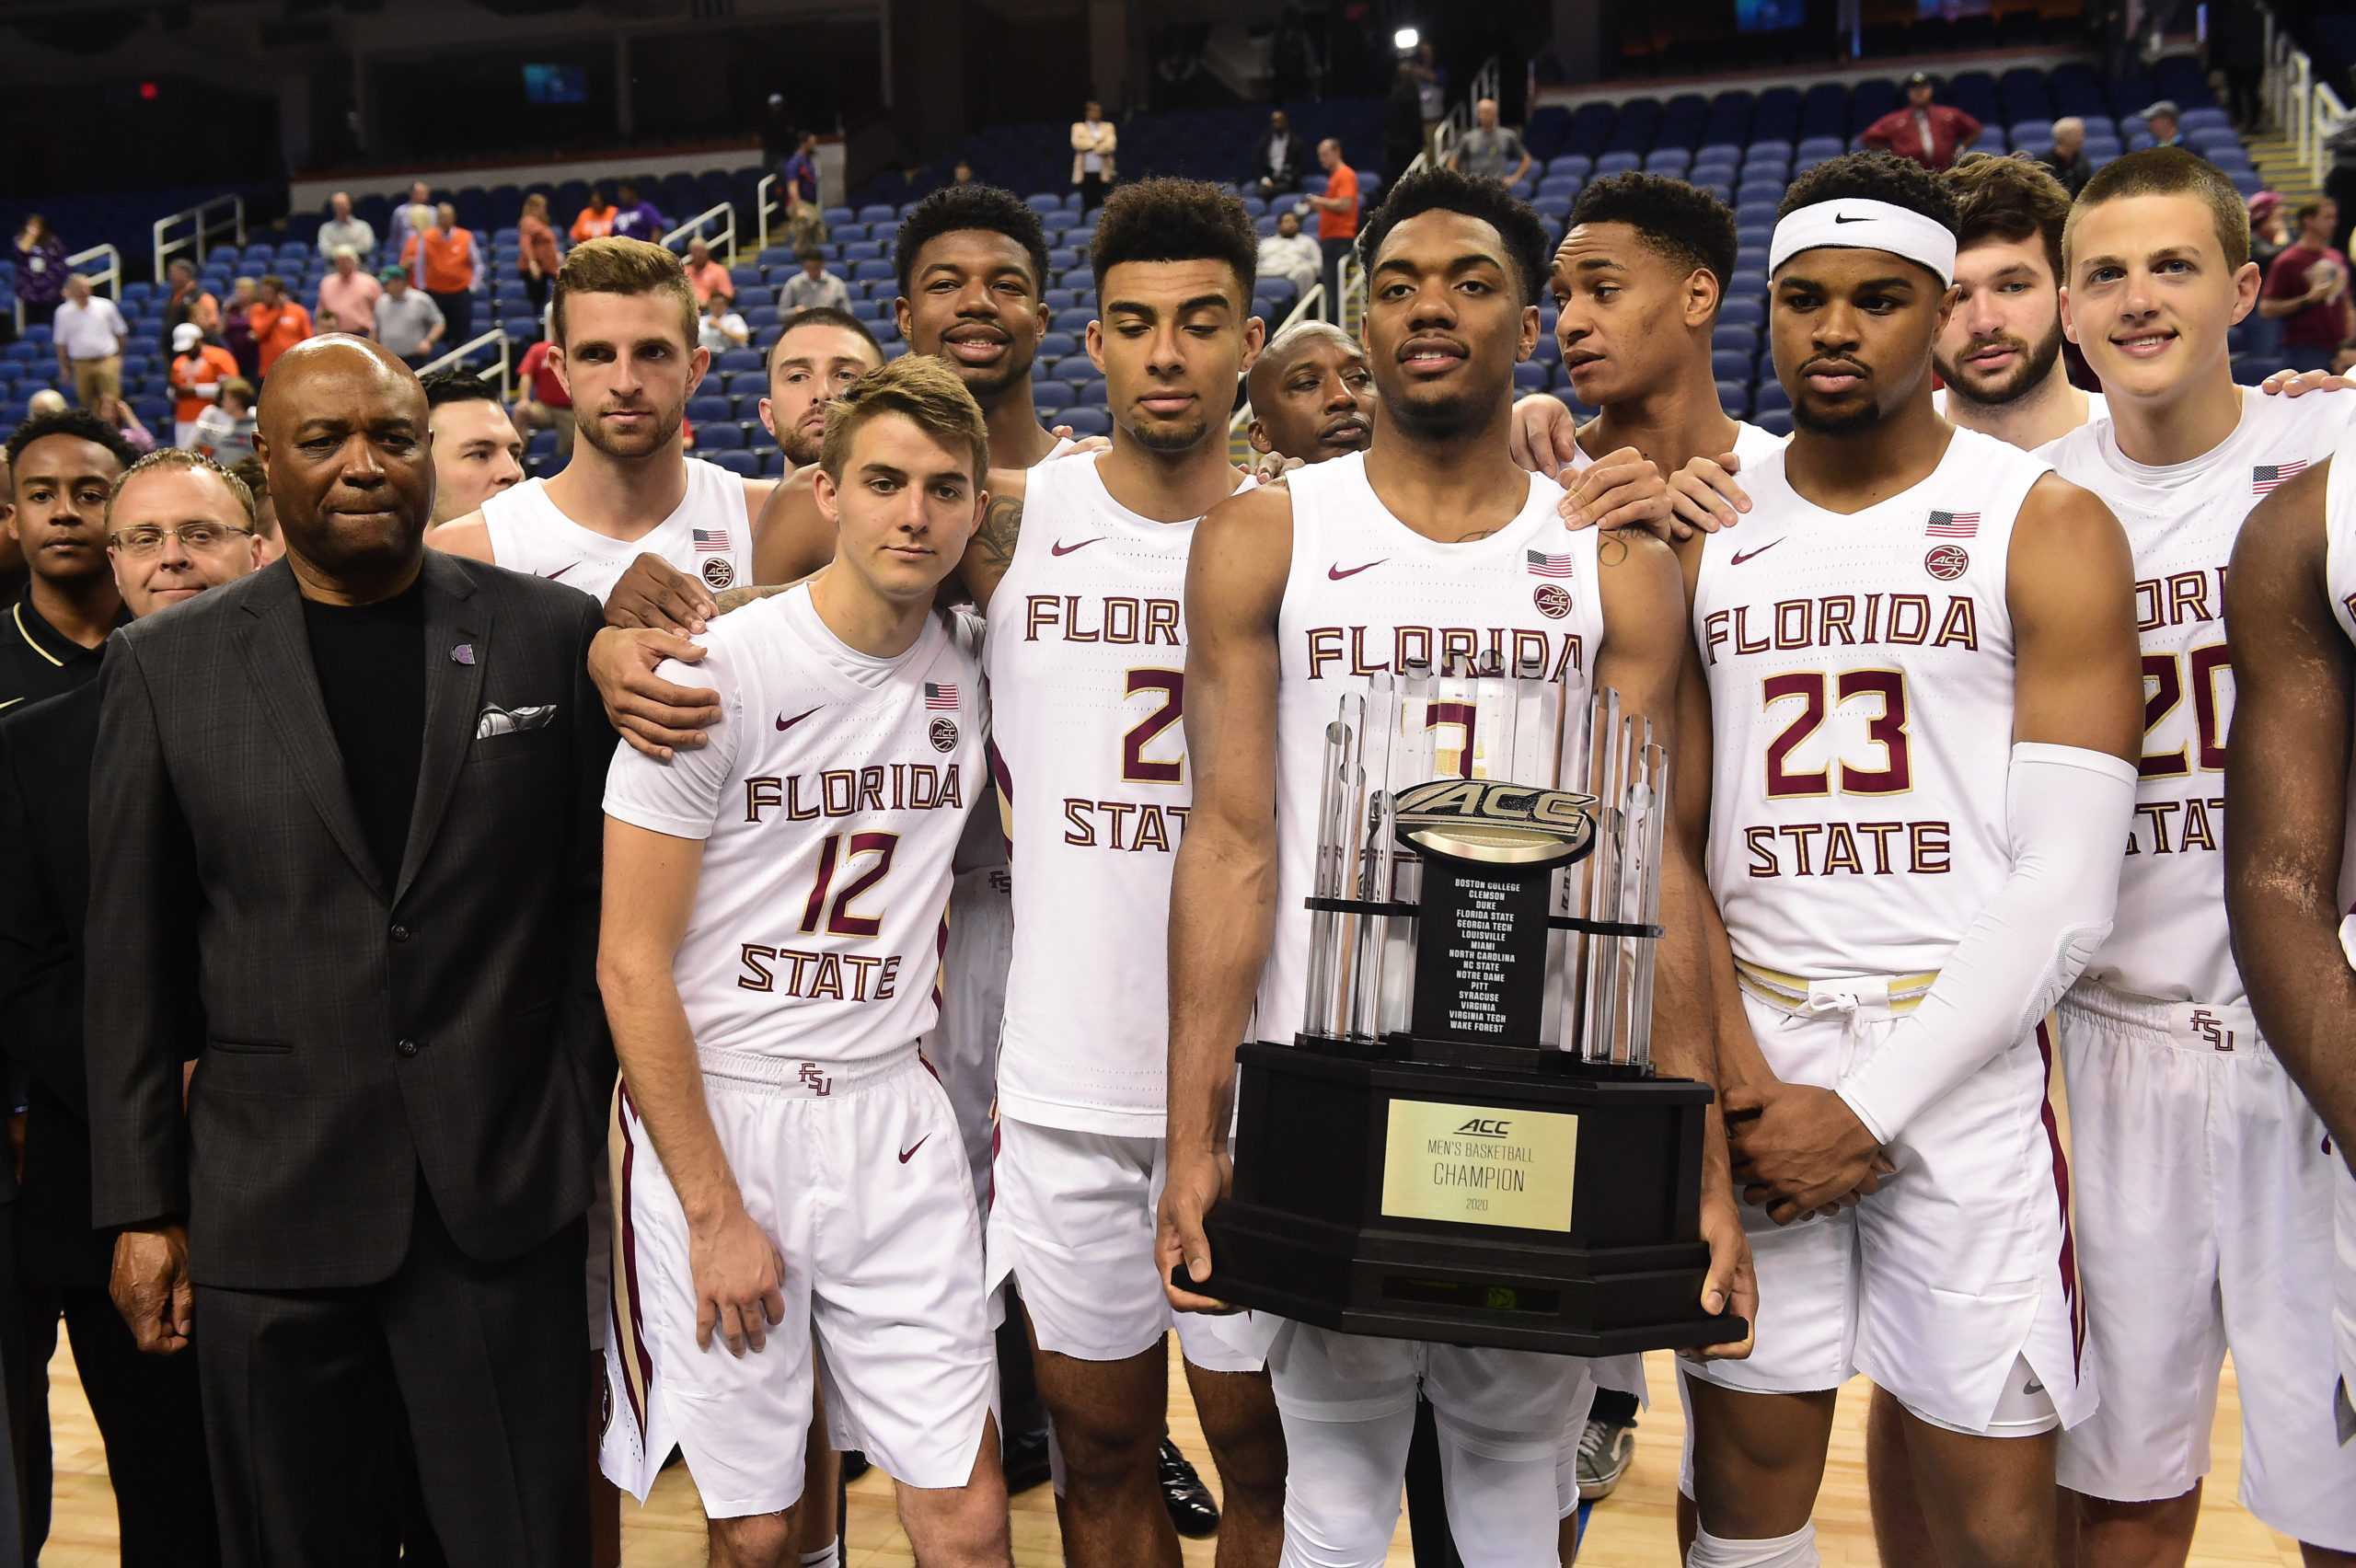 GREENSBORO, NORTH CAROLINA - MARCH 12: The Florida State Seminoles, lead by Head coach Leonard Hamilton (L), are presented with the regular season trophy following the cancelation of the remainder of the 2020 Mens ACC Basketball Tournament at Greensboro Coliseum on March 12, 2020 in Greensboro, North Carolina. The cancelation is due to concerns over the possible spread of the Coronavirus (COVID-19). (Jared C. Tilton/Getty Images/TNS)